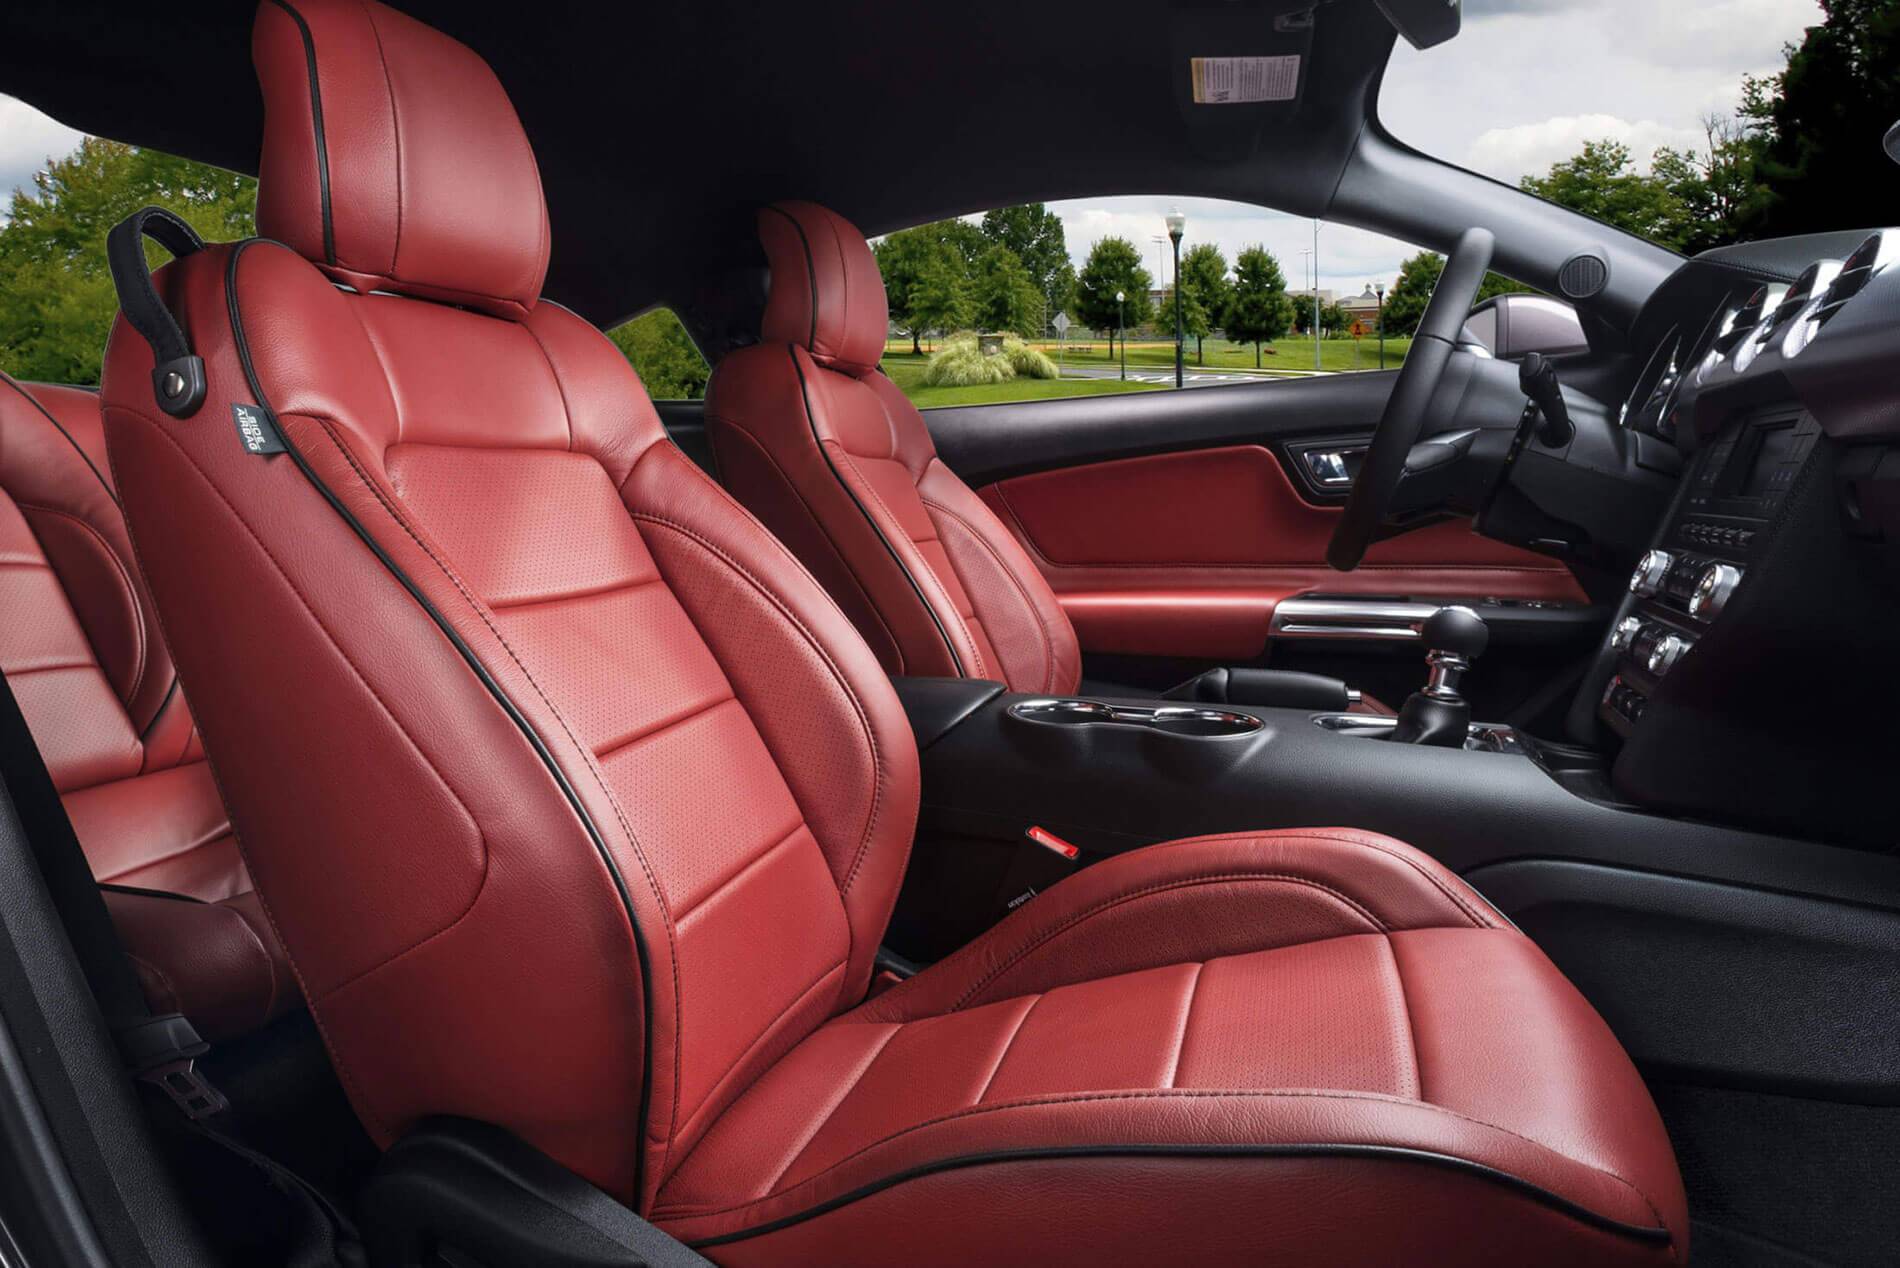 Is Red Leather Car Interior Tacky?